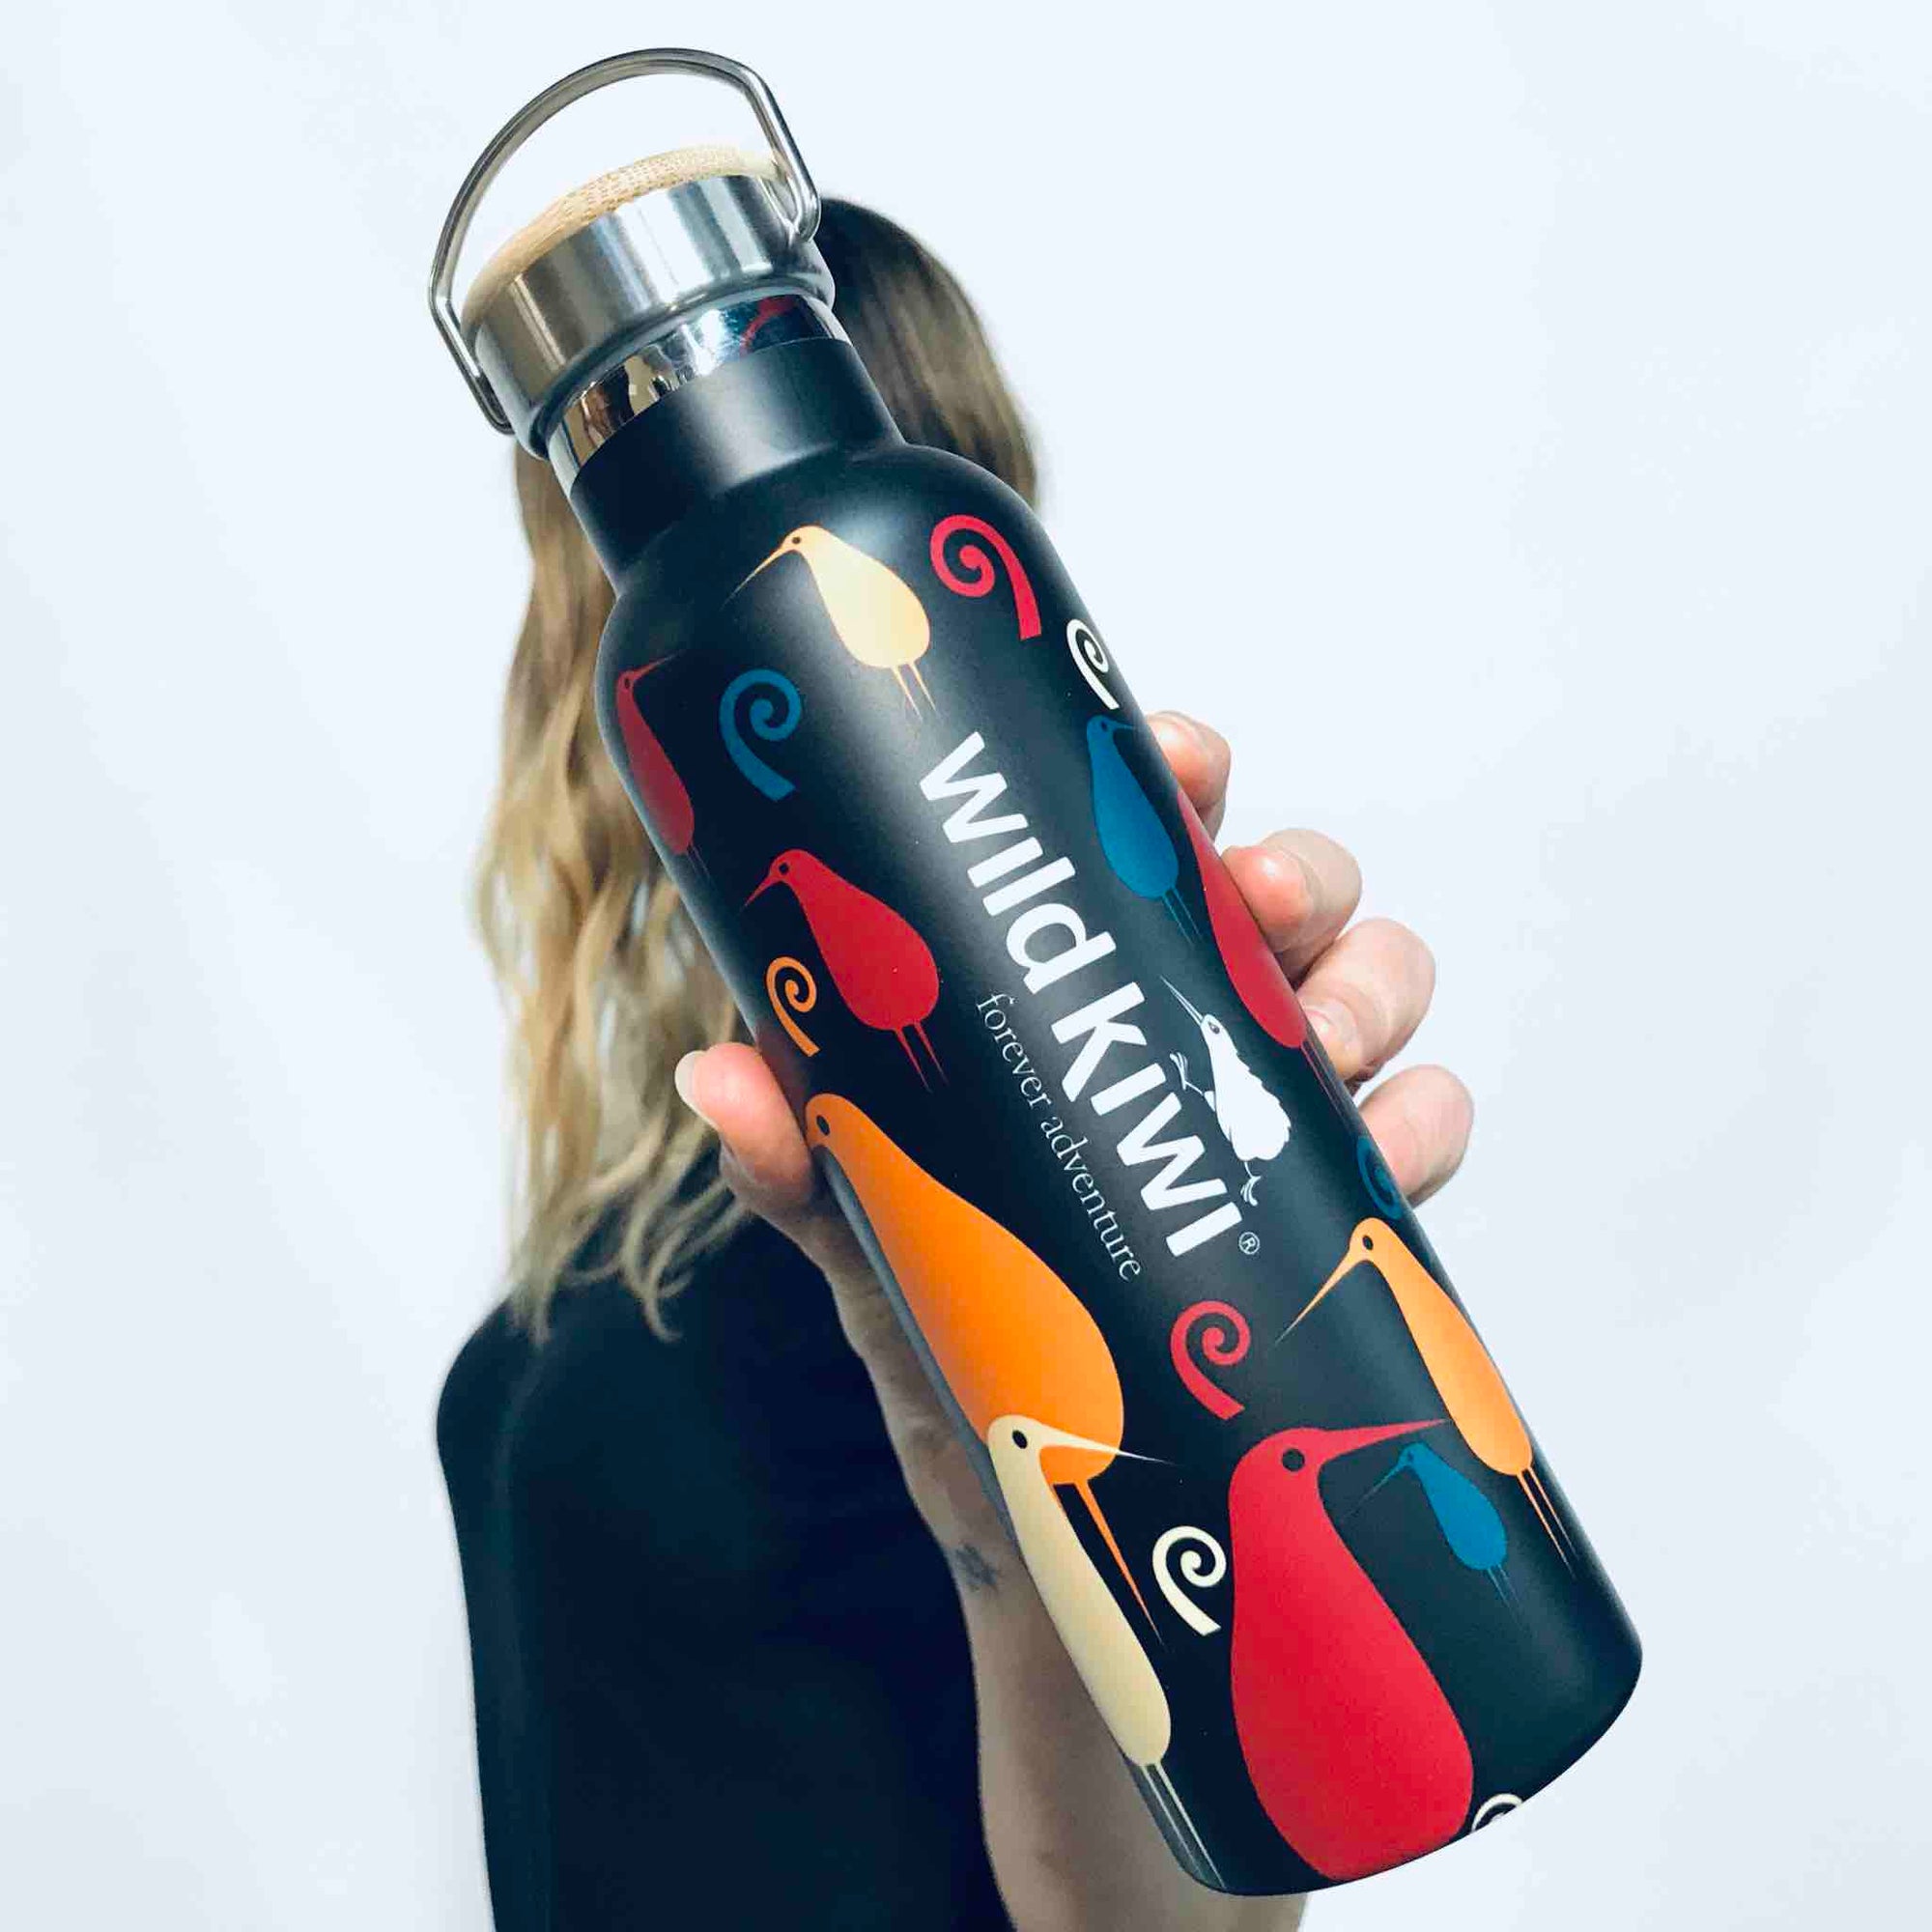 Wild Kiwi Insulated Drink Bottle-Ideal for Hot or Cold Drinks